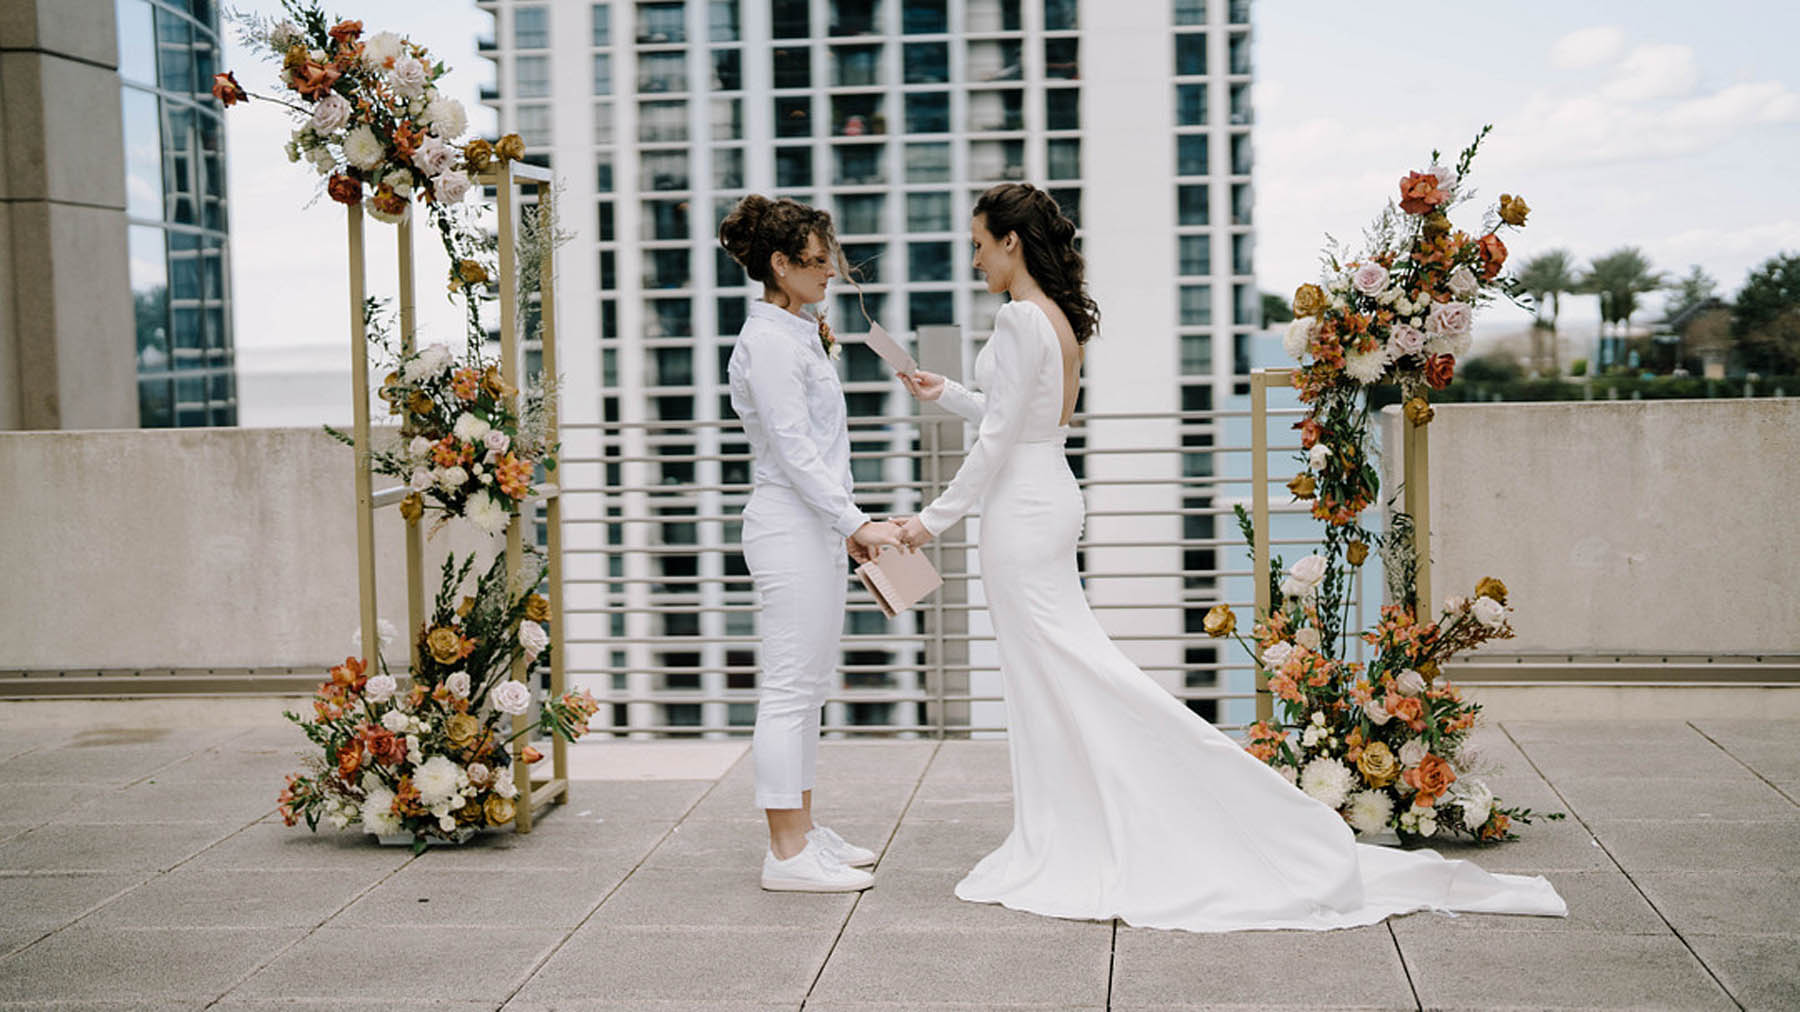 LGBTQ+ wedding inspiration: celebrating queer love with a rooftop